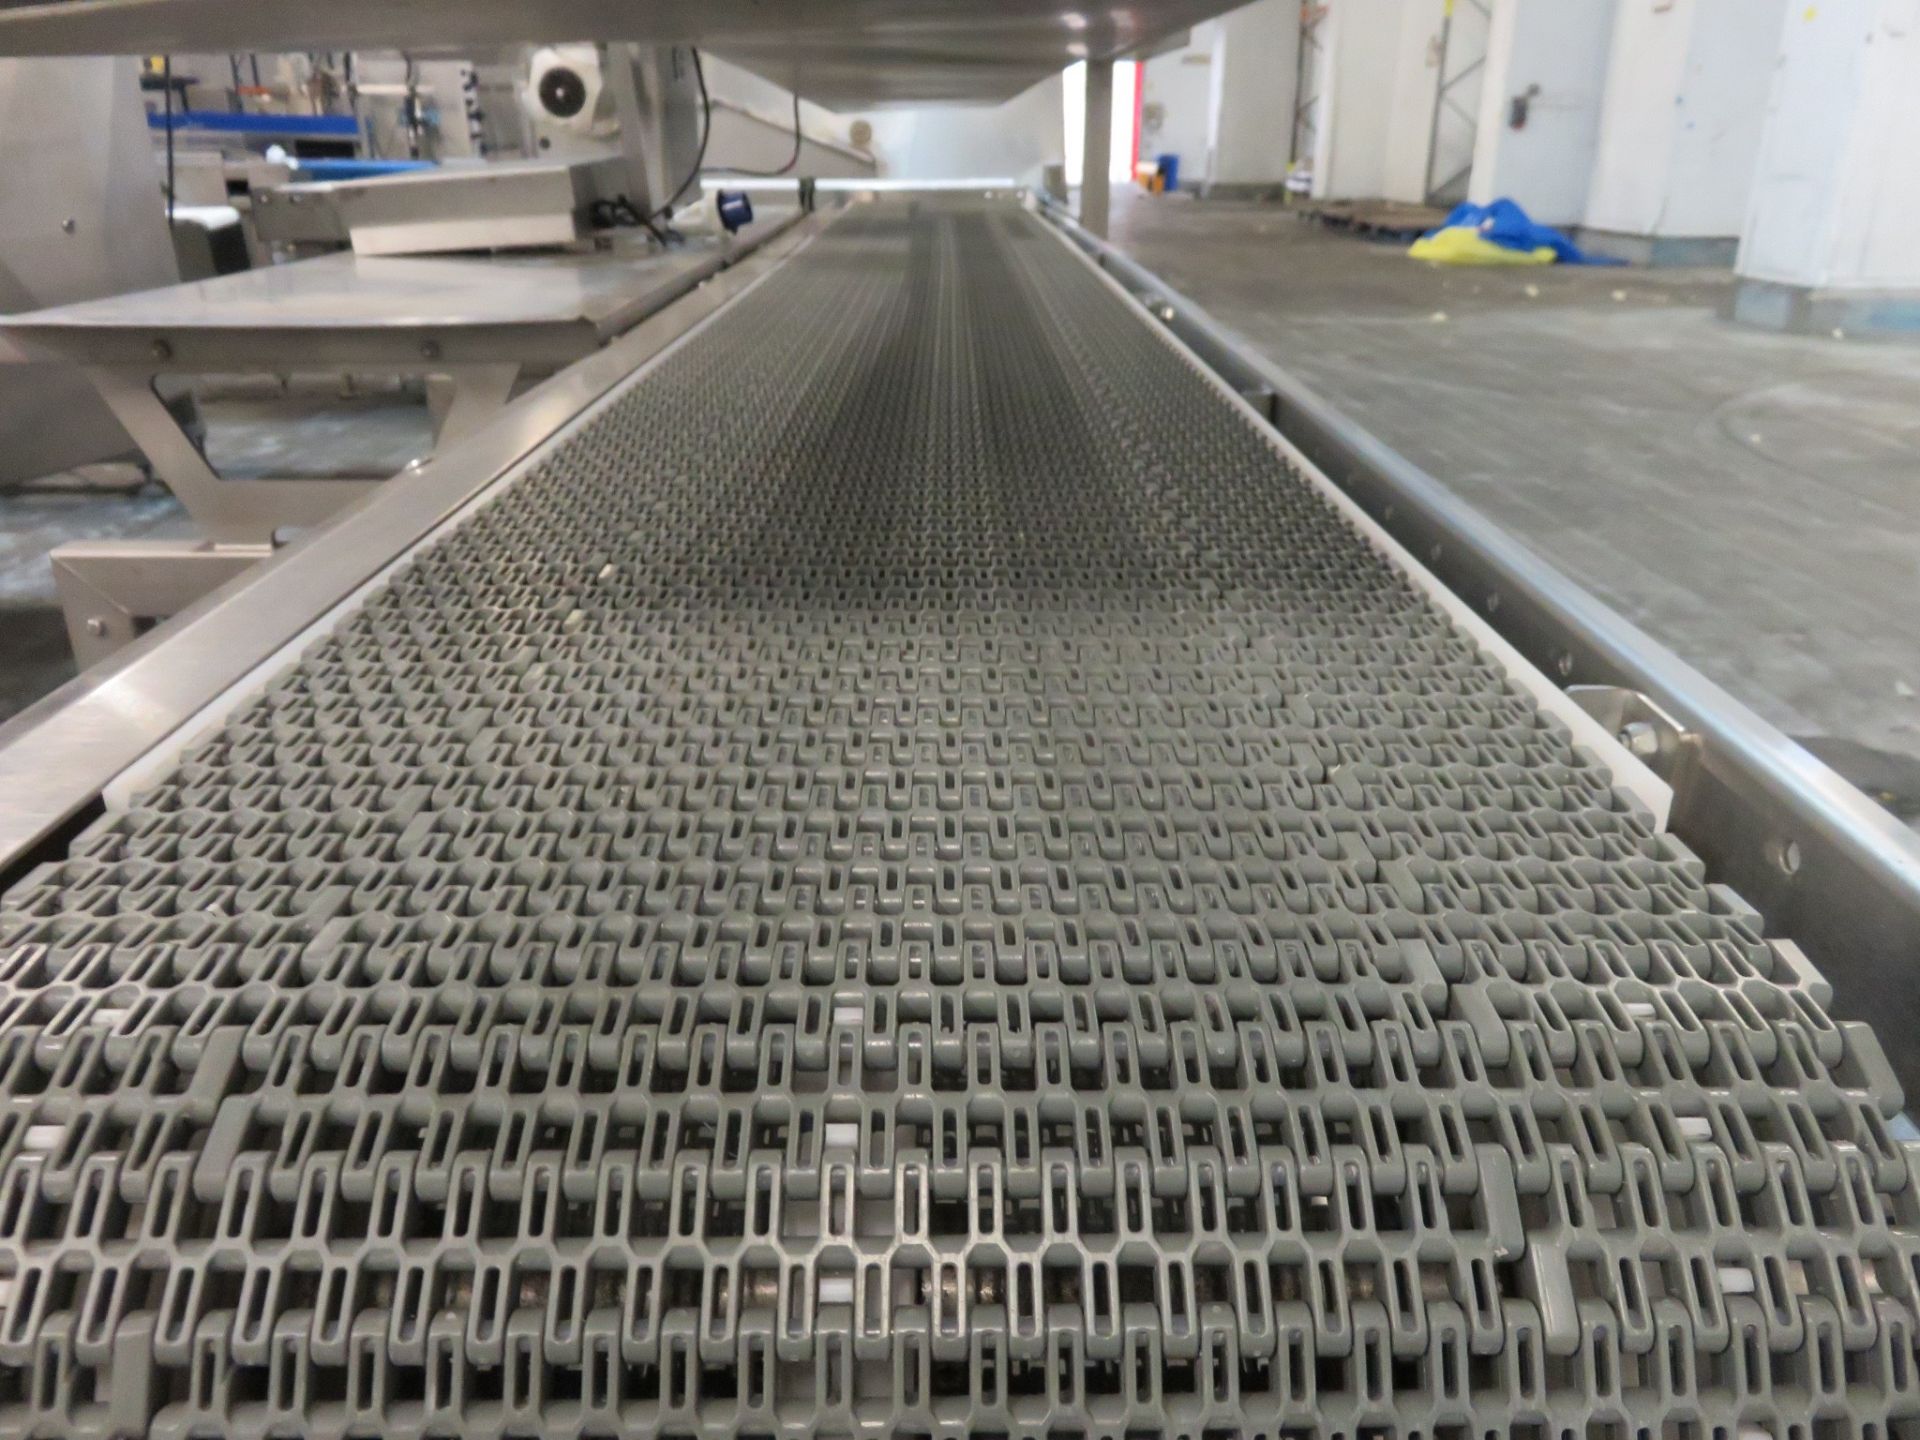 S/s Tier Conveyor. top 230mm wide, bottom 380mm wide x 3 mtr long. Magic eye Censor. As New. LO £40 - Image 5 of 6